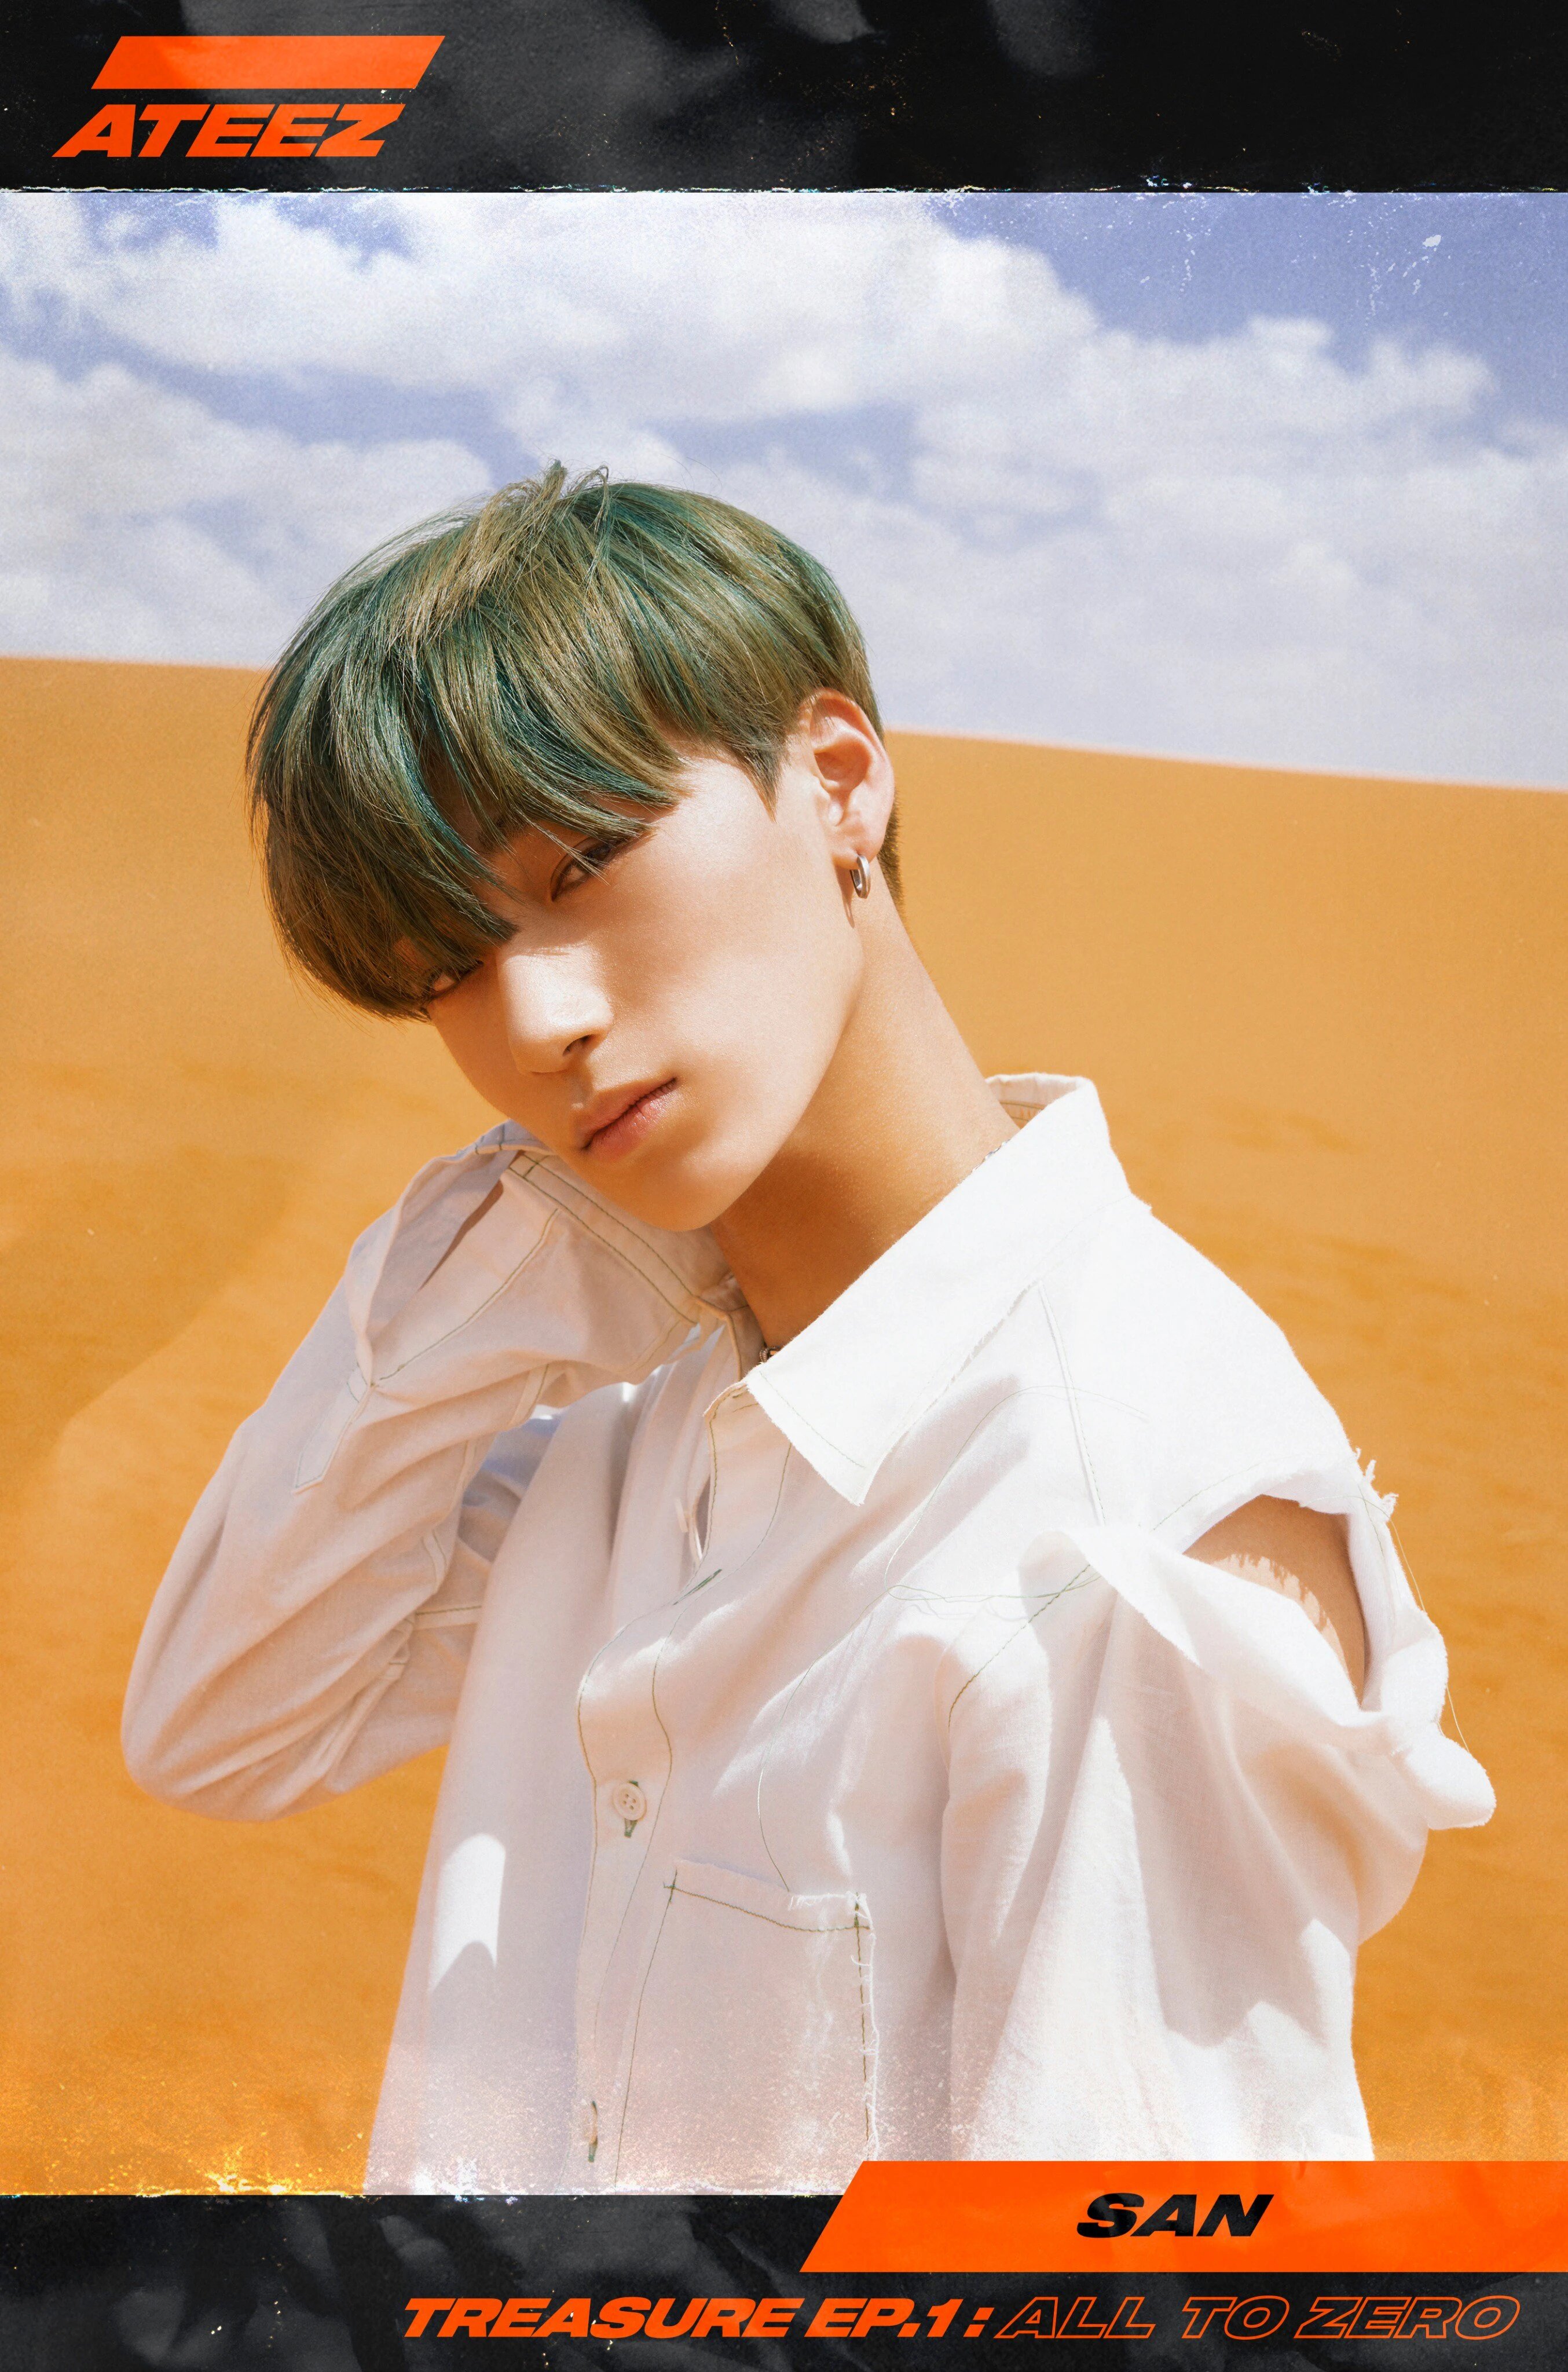 ATEEZ 'TREASURE EP.1 : All To Zero' Concept Teaser Images | kpopping